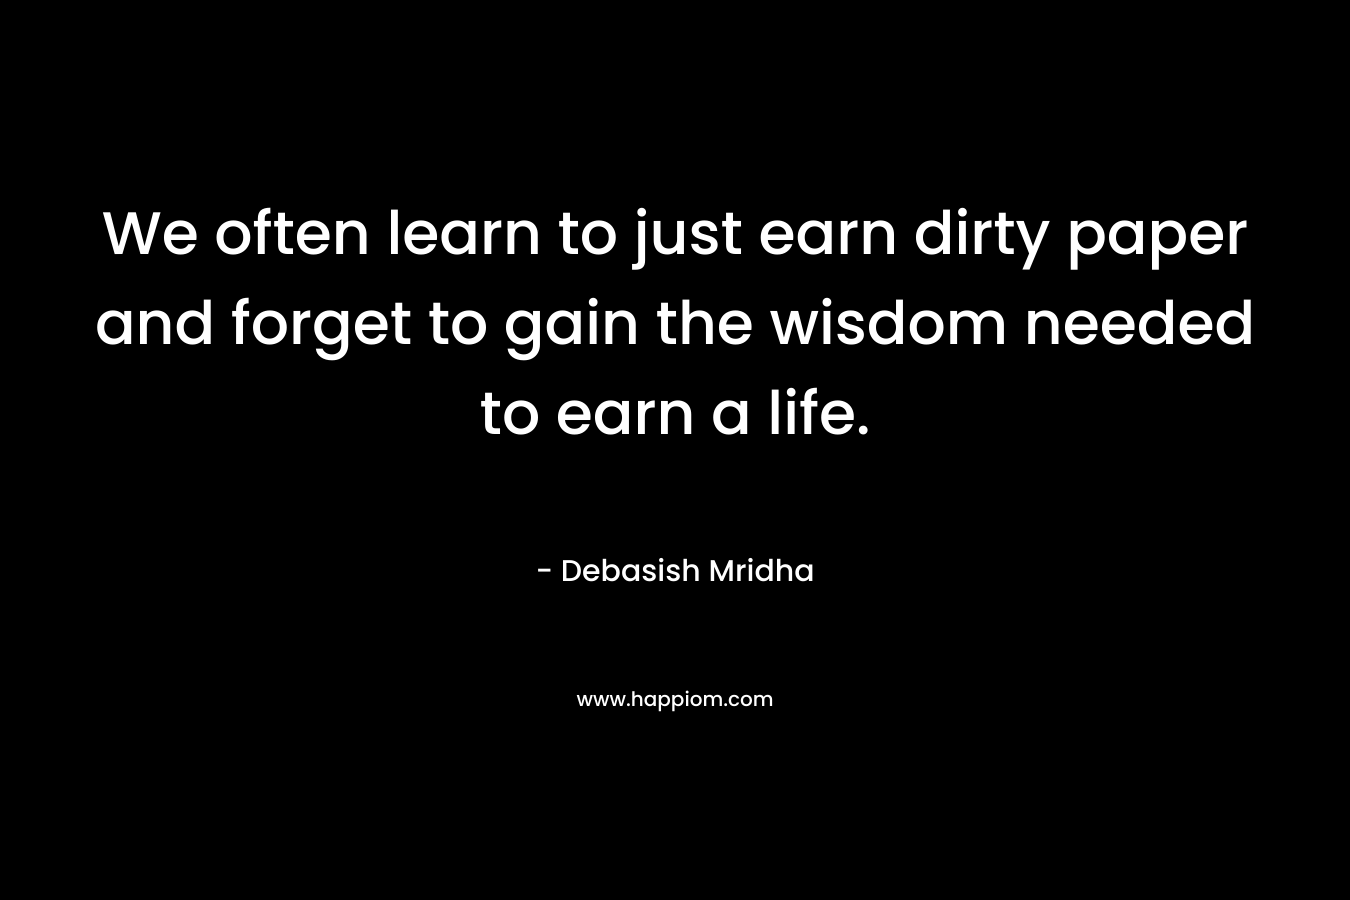 We often learn to just earn dirty paper and forget to gain the wisdom needed to earn a life.